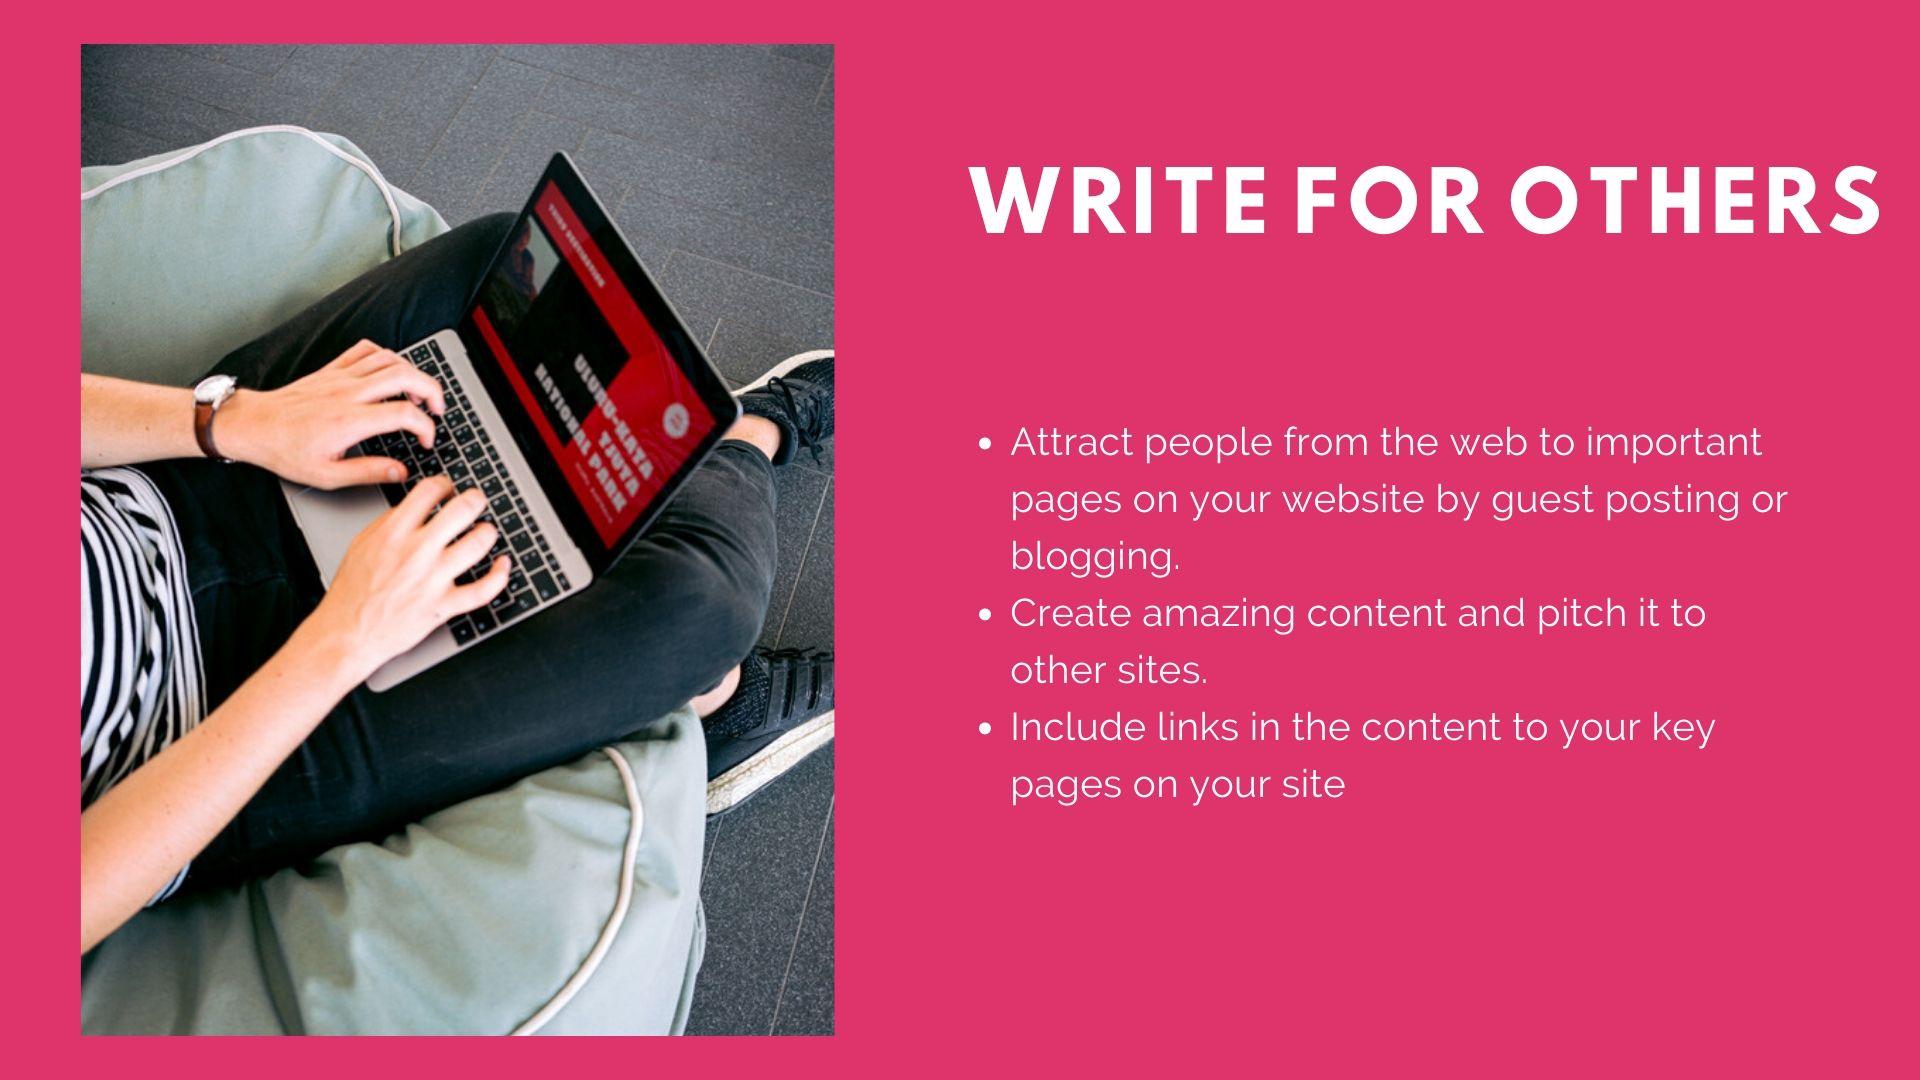 Content - write for others 